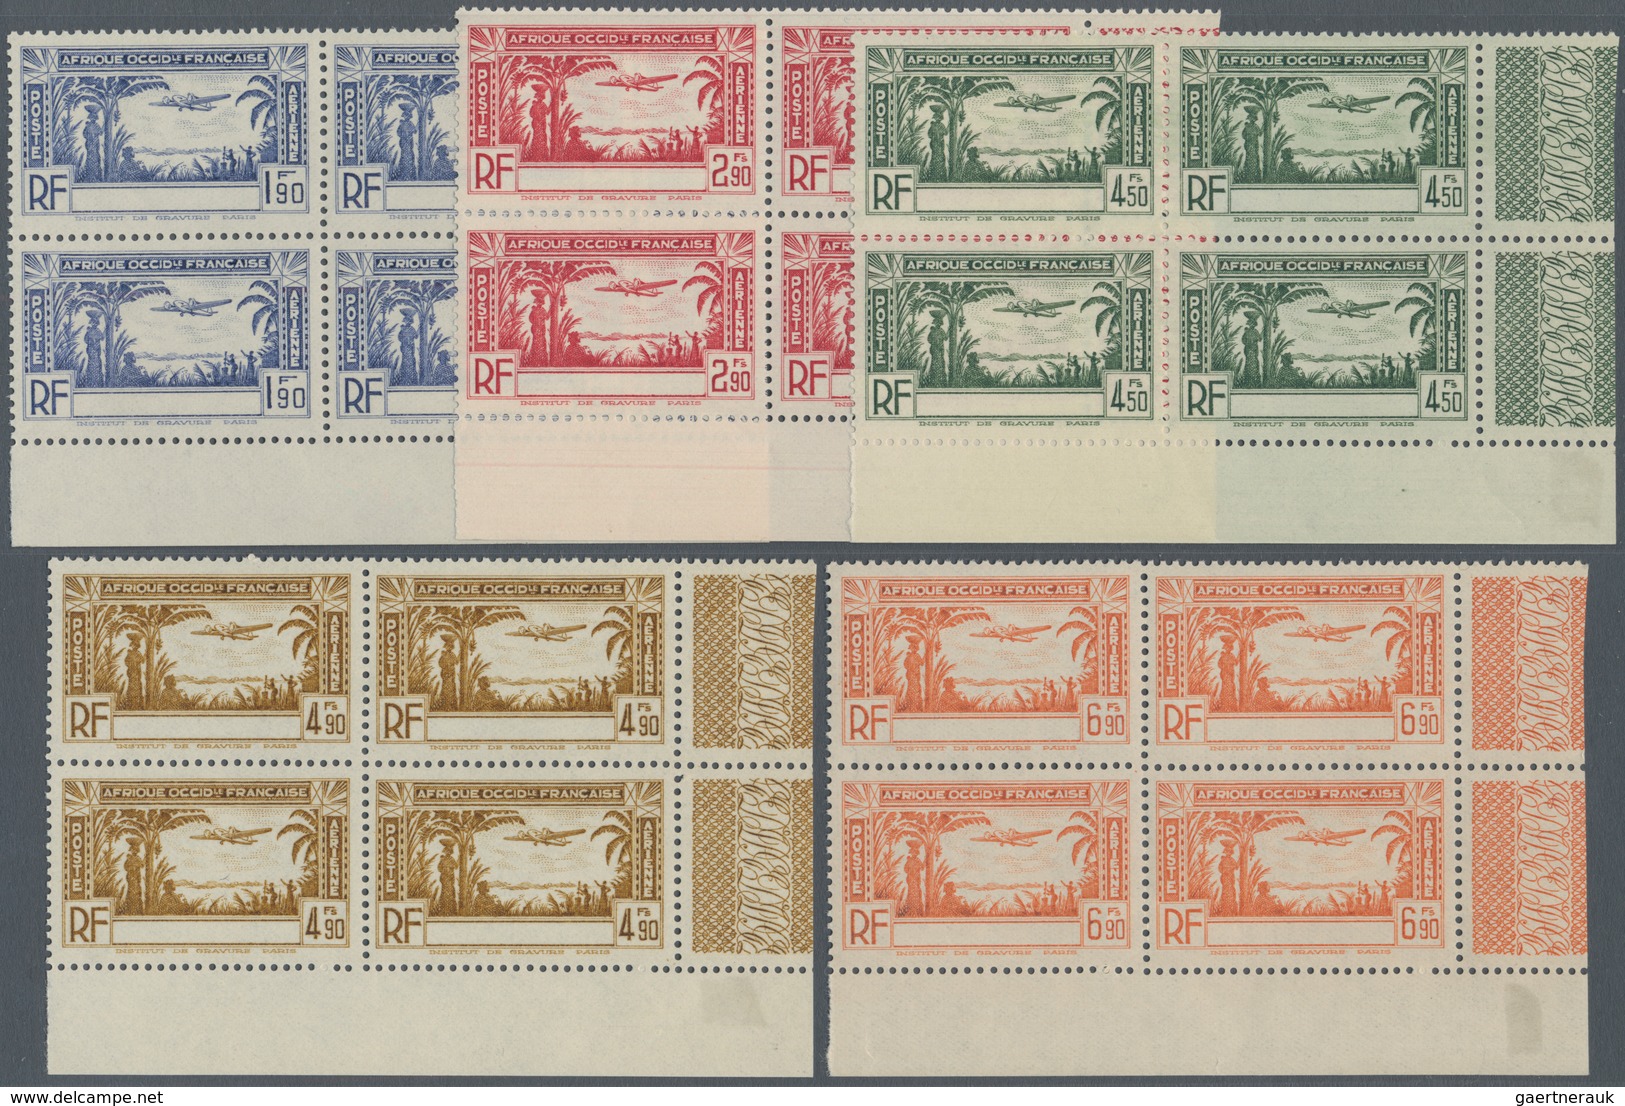 00482 Elfenbeinküste: 1940, Complete Set Airmail Stamps Without Imprint "Cote D'Ivoire" At Bottom, Corner - Covers & Documents